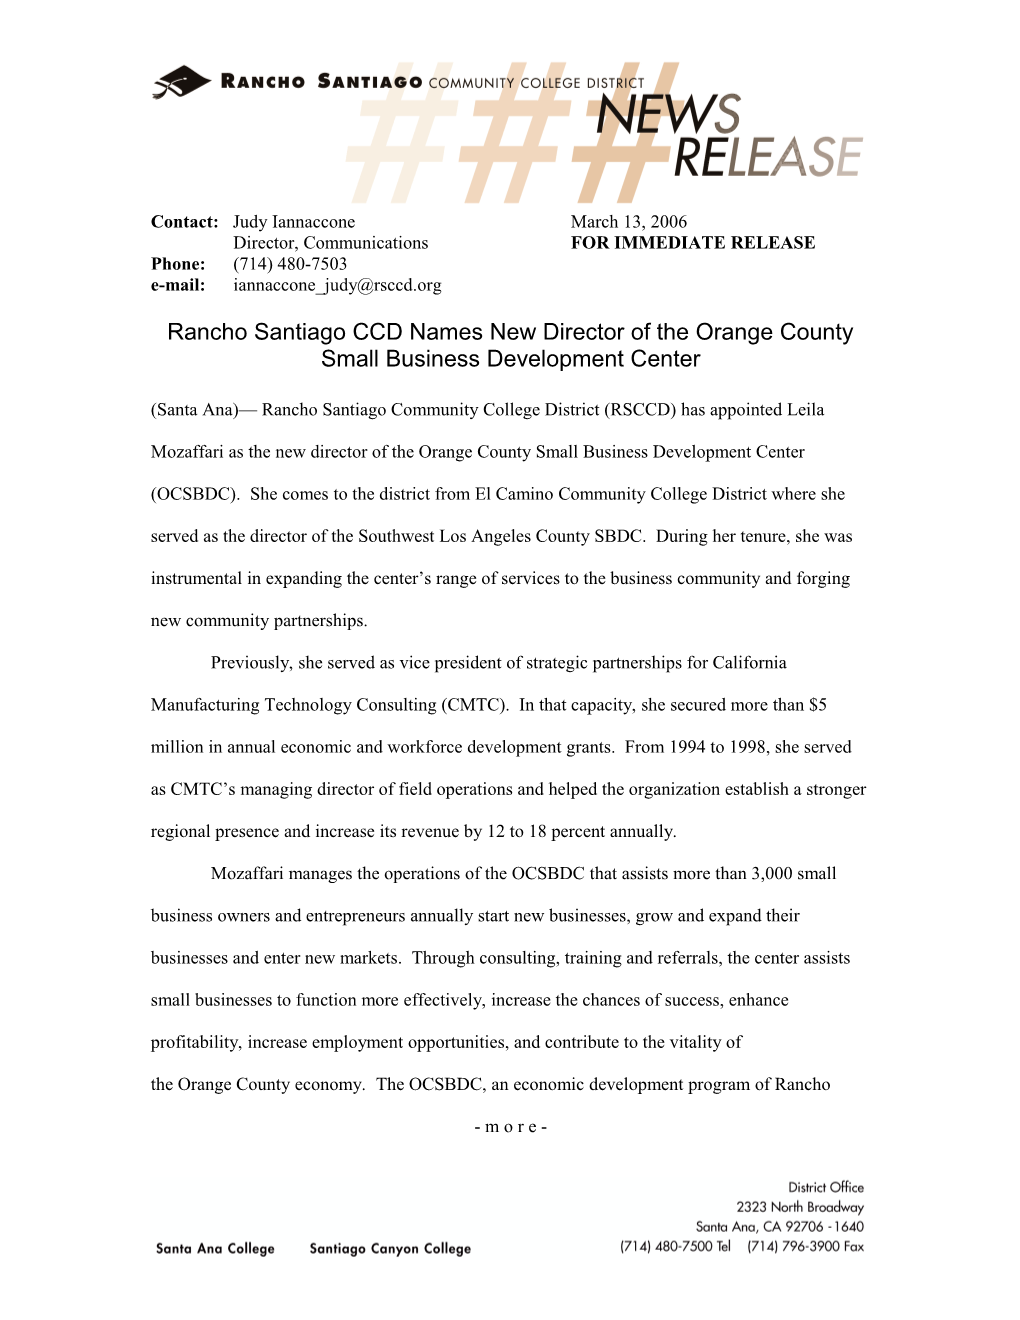 Rancho Santiago CCD Names New Director of the Orange County Small Business Development Center